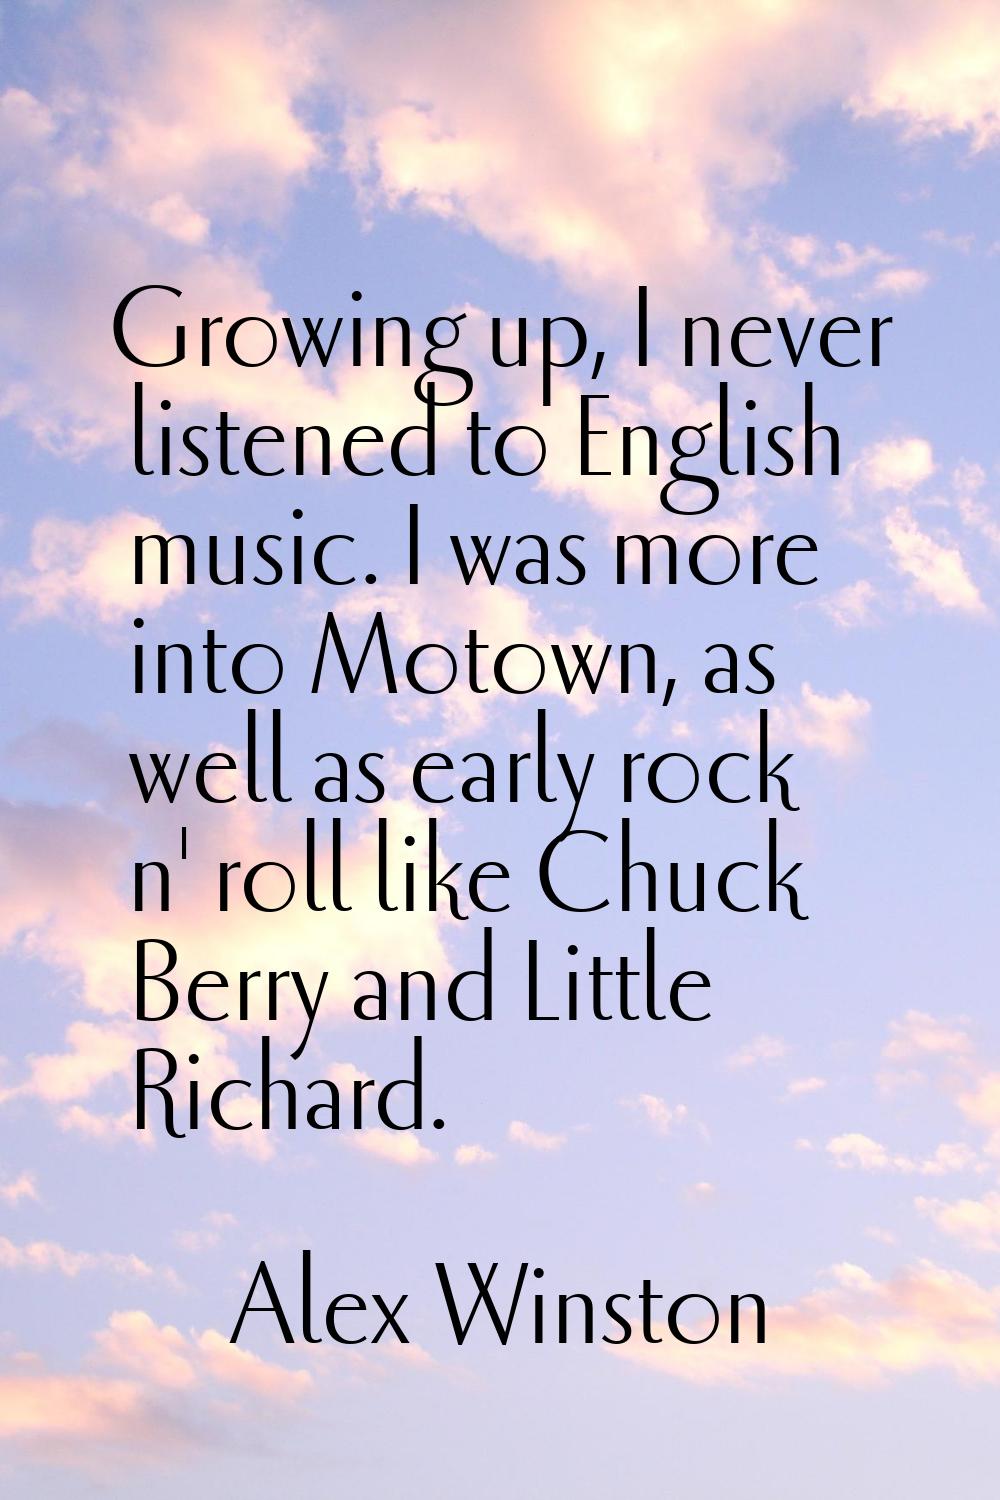 Growing up, I never listened to English music. I was more into Motown, as well as early rock n' rol